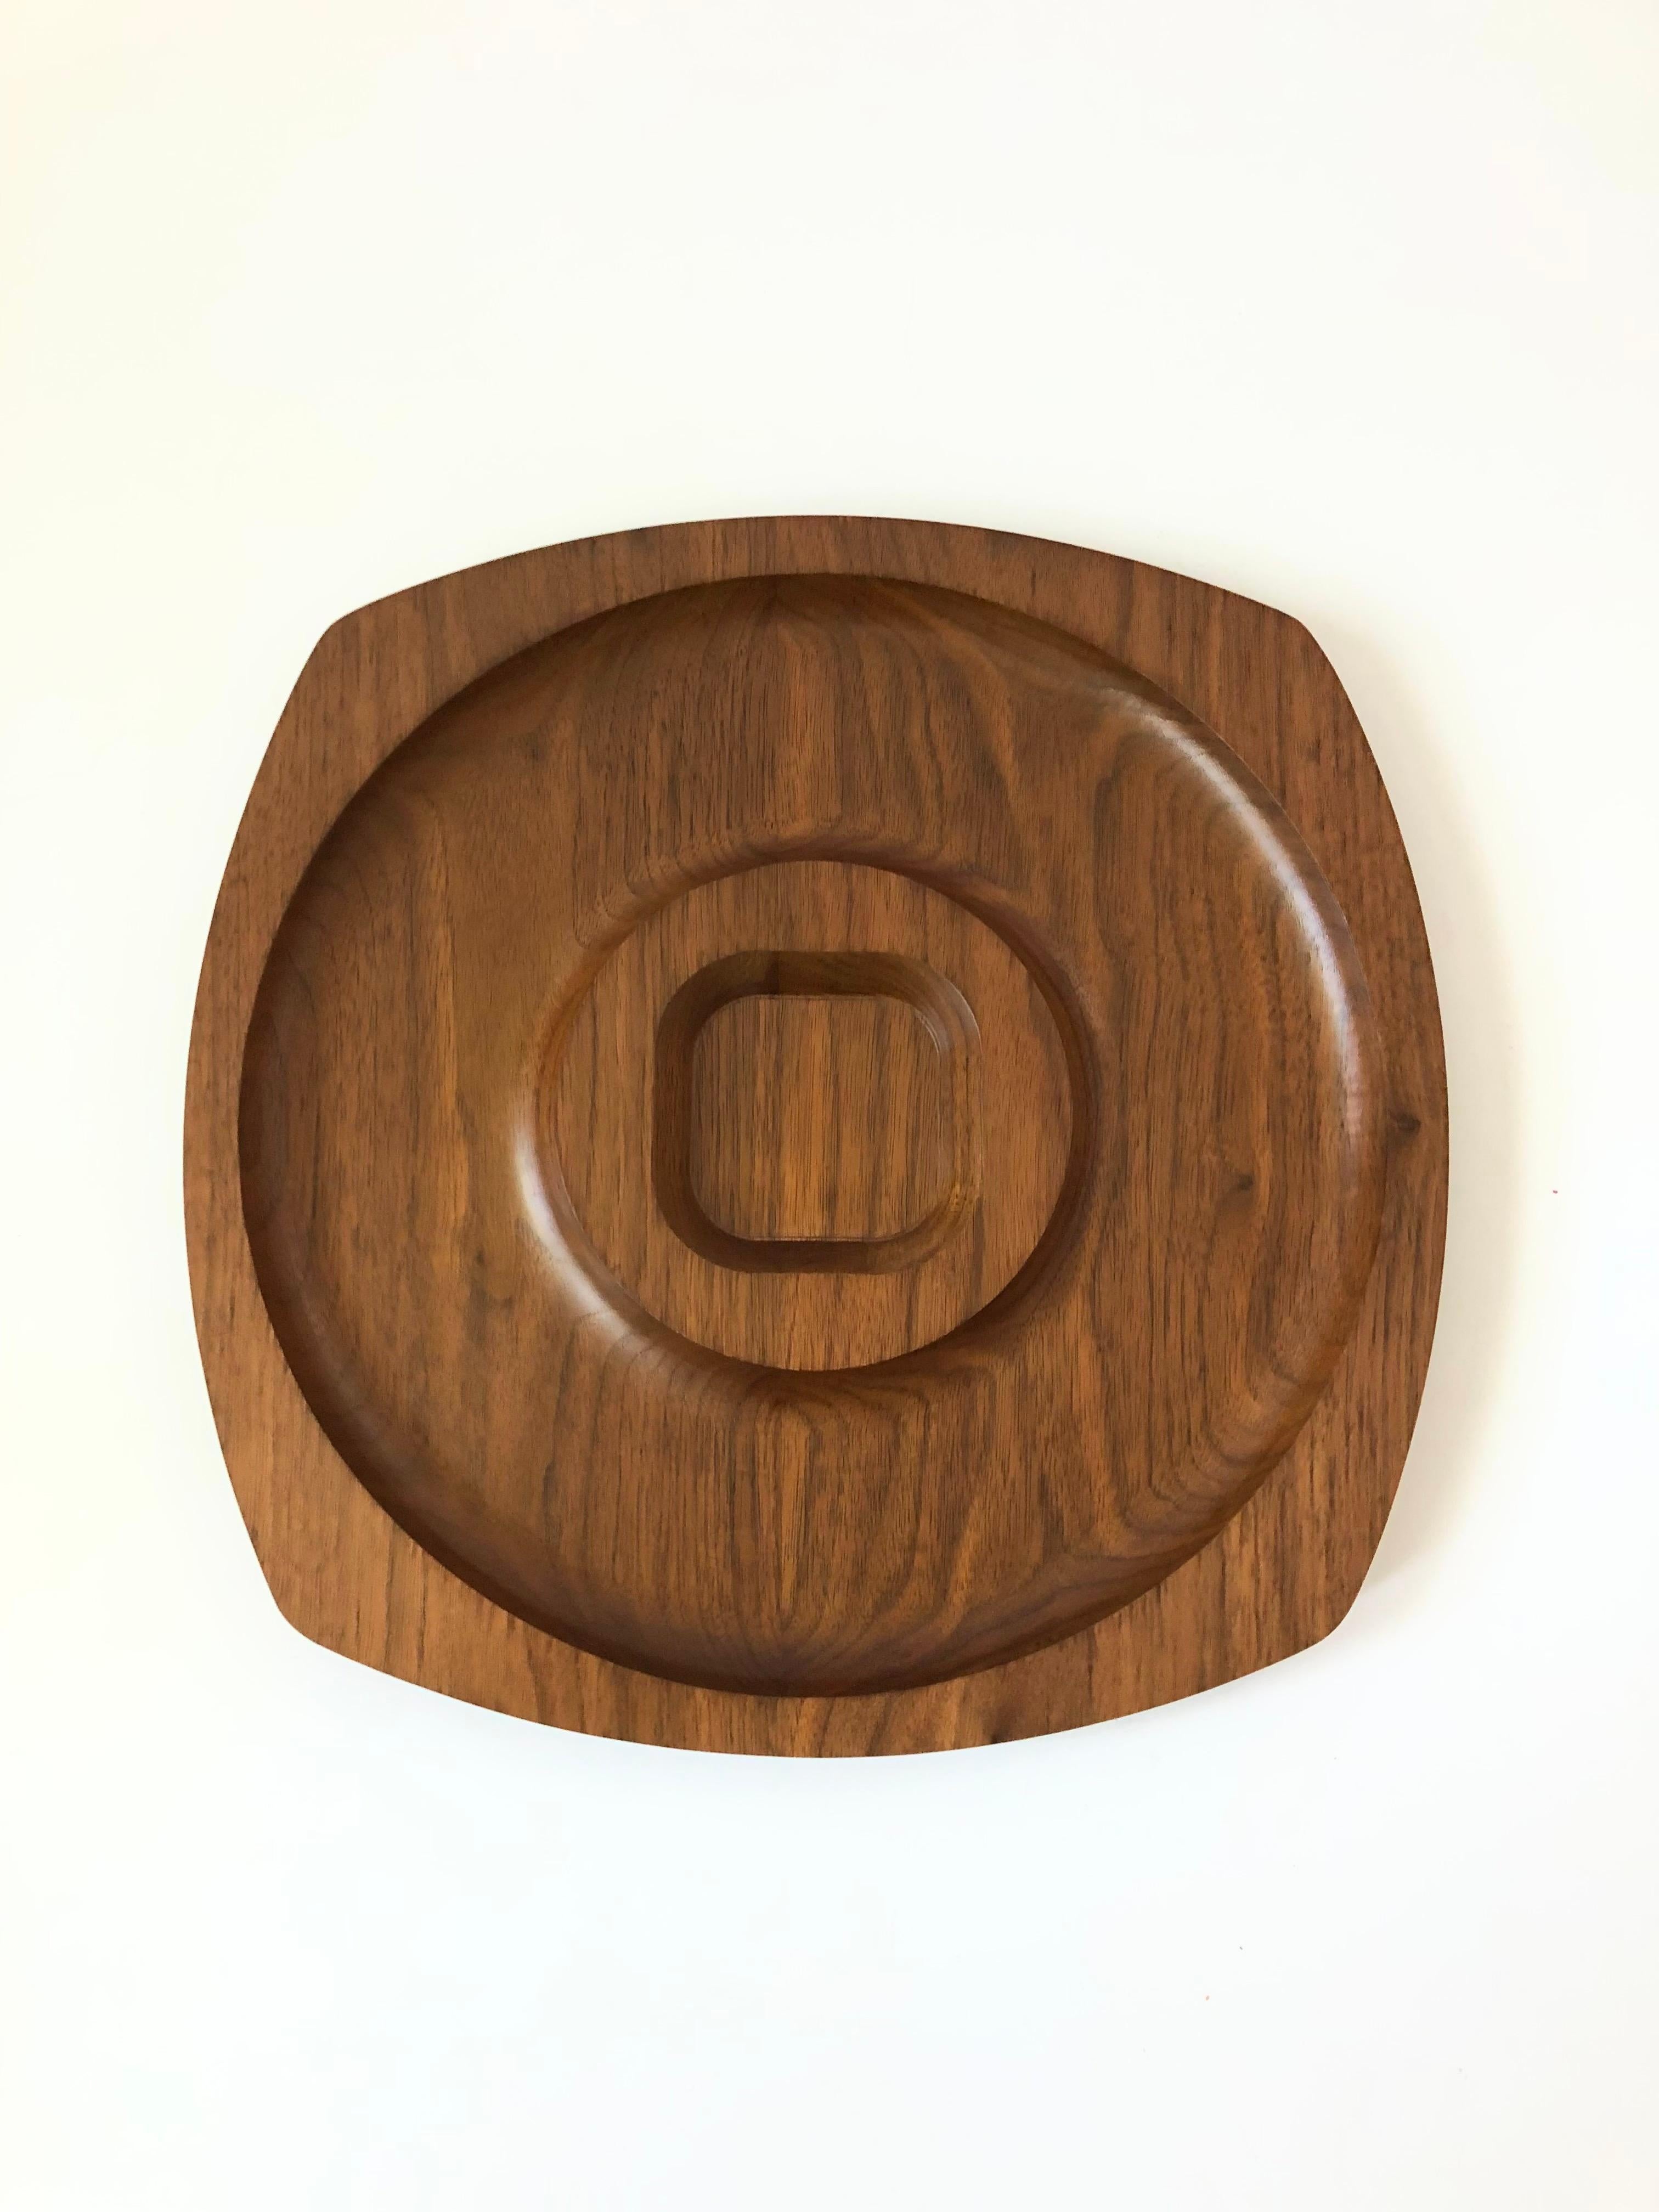 A mid century divided wood tray. Nice minimalist design in a rounded square shape. Made in Sun Valley, CA by Gladmark.